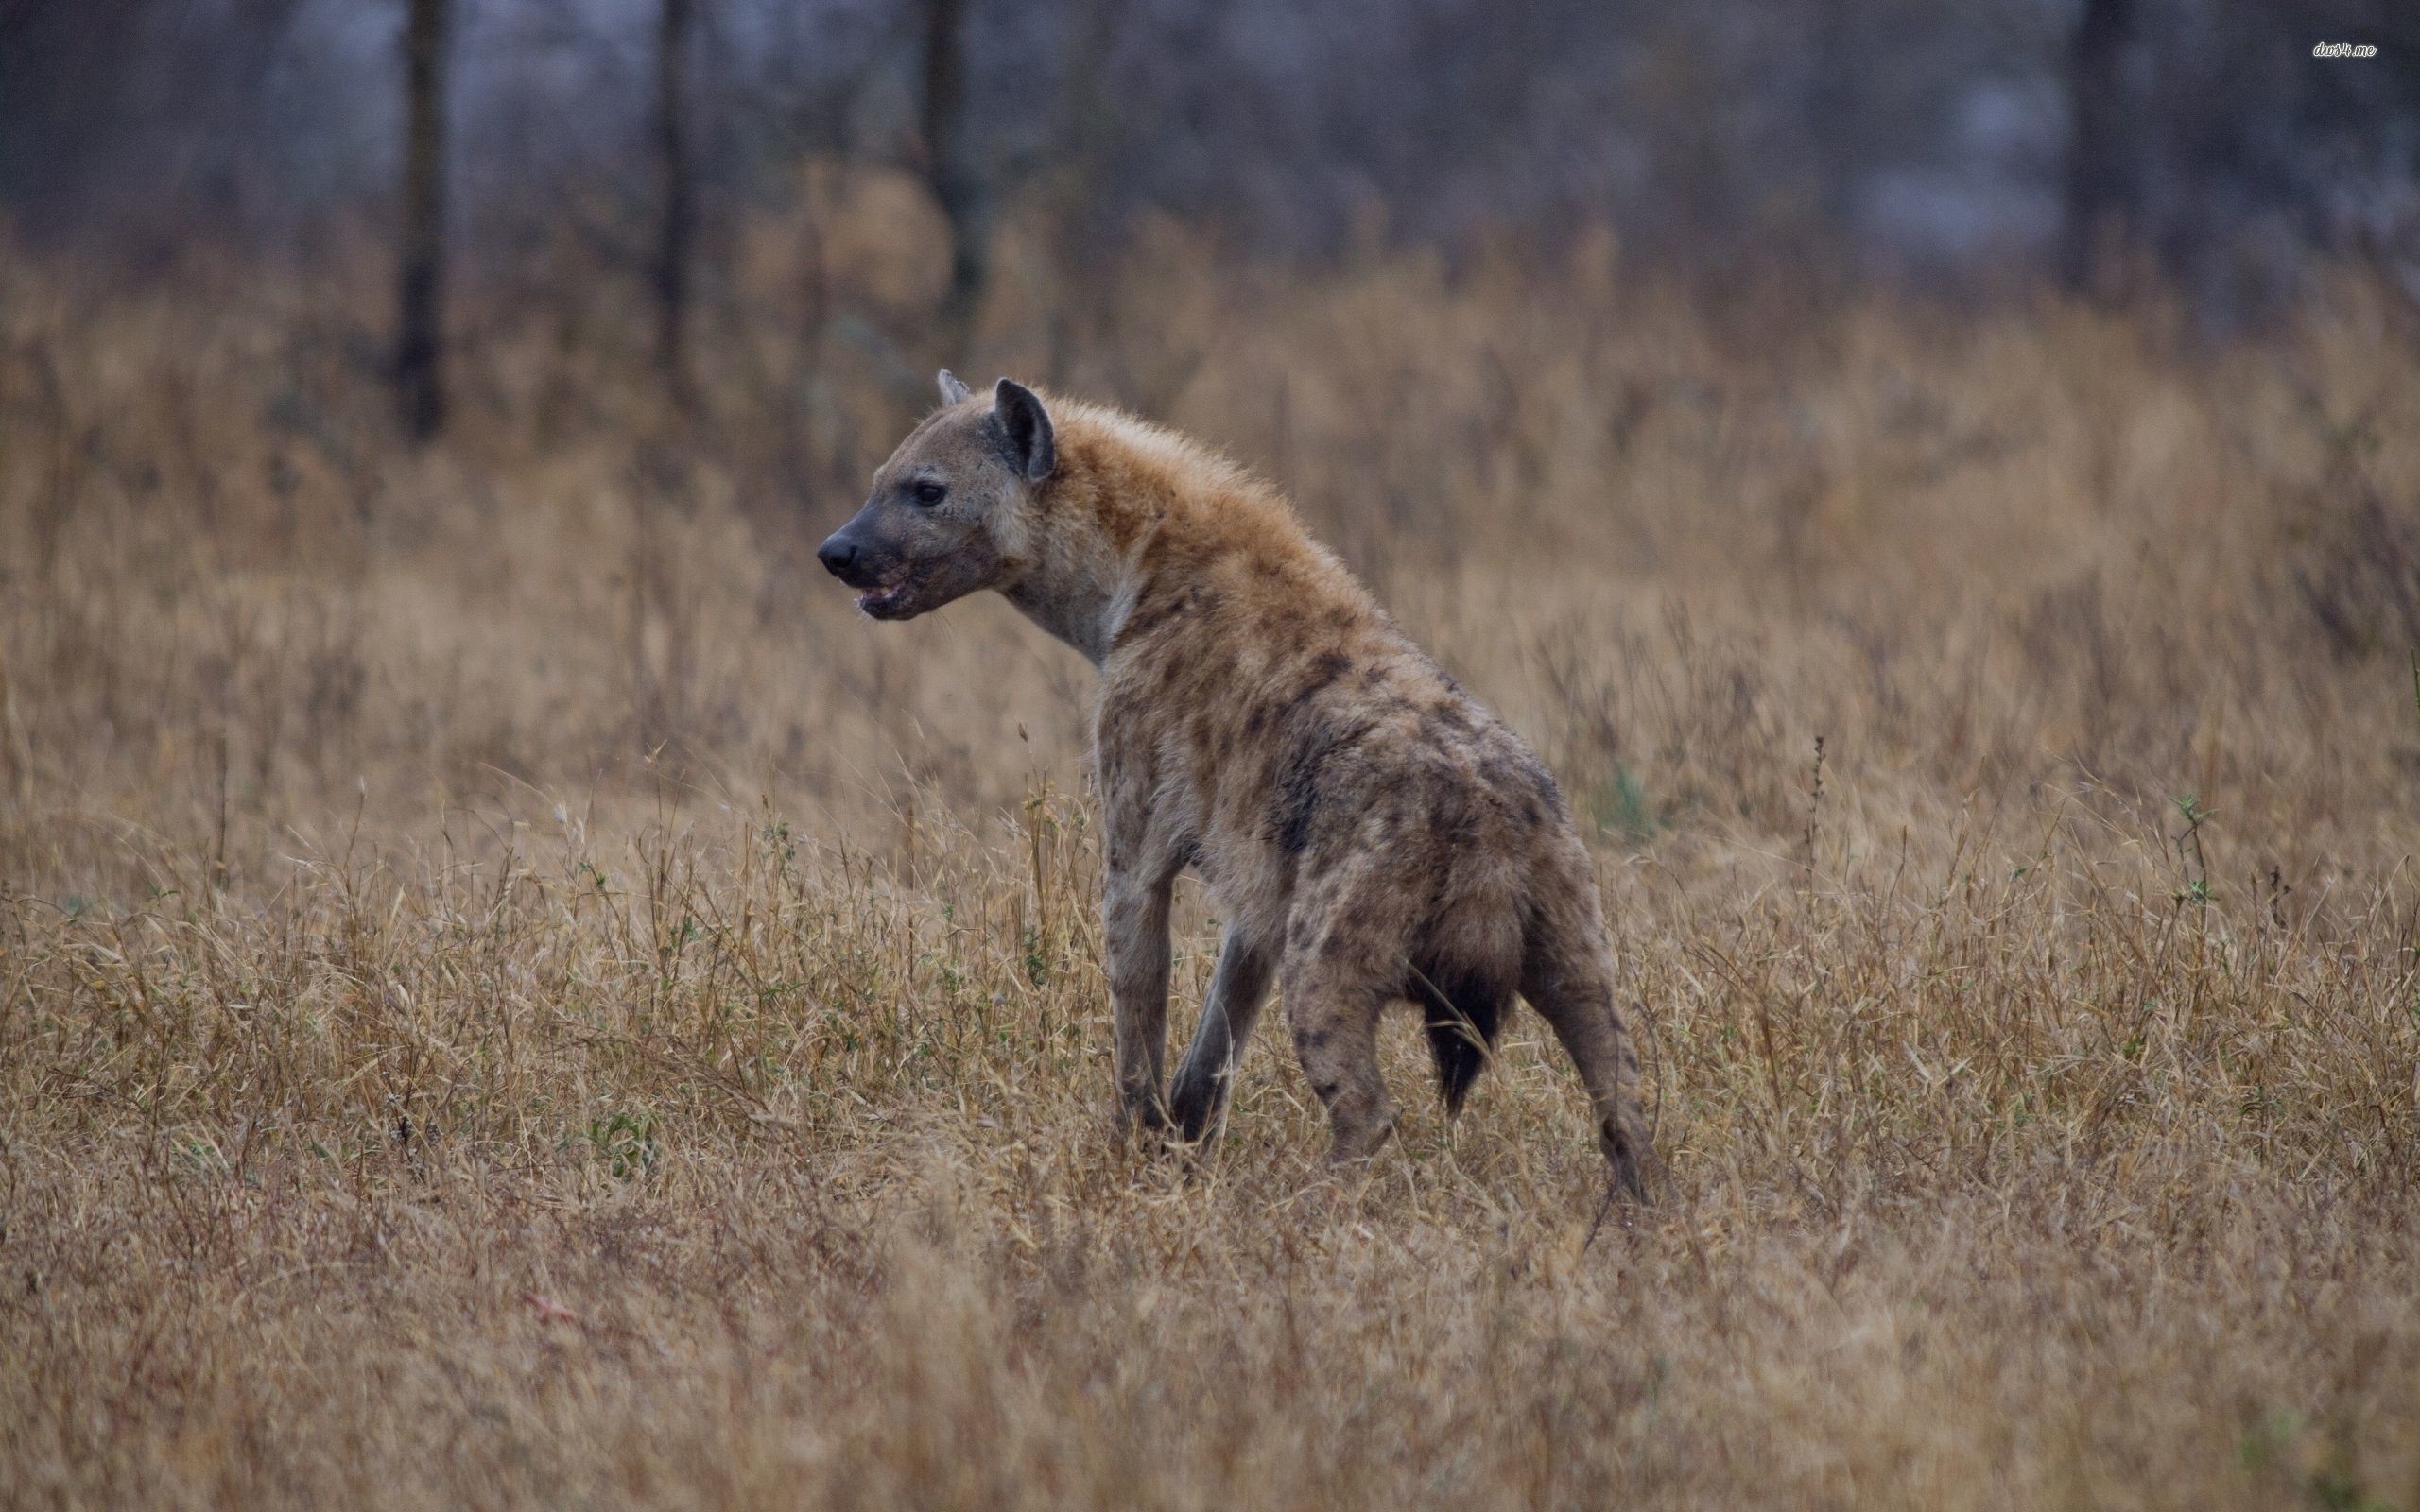 The Hyena In Search Of Hope Background Pictures Of Hyenas Background Image  And Wallpaper for Free Download